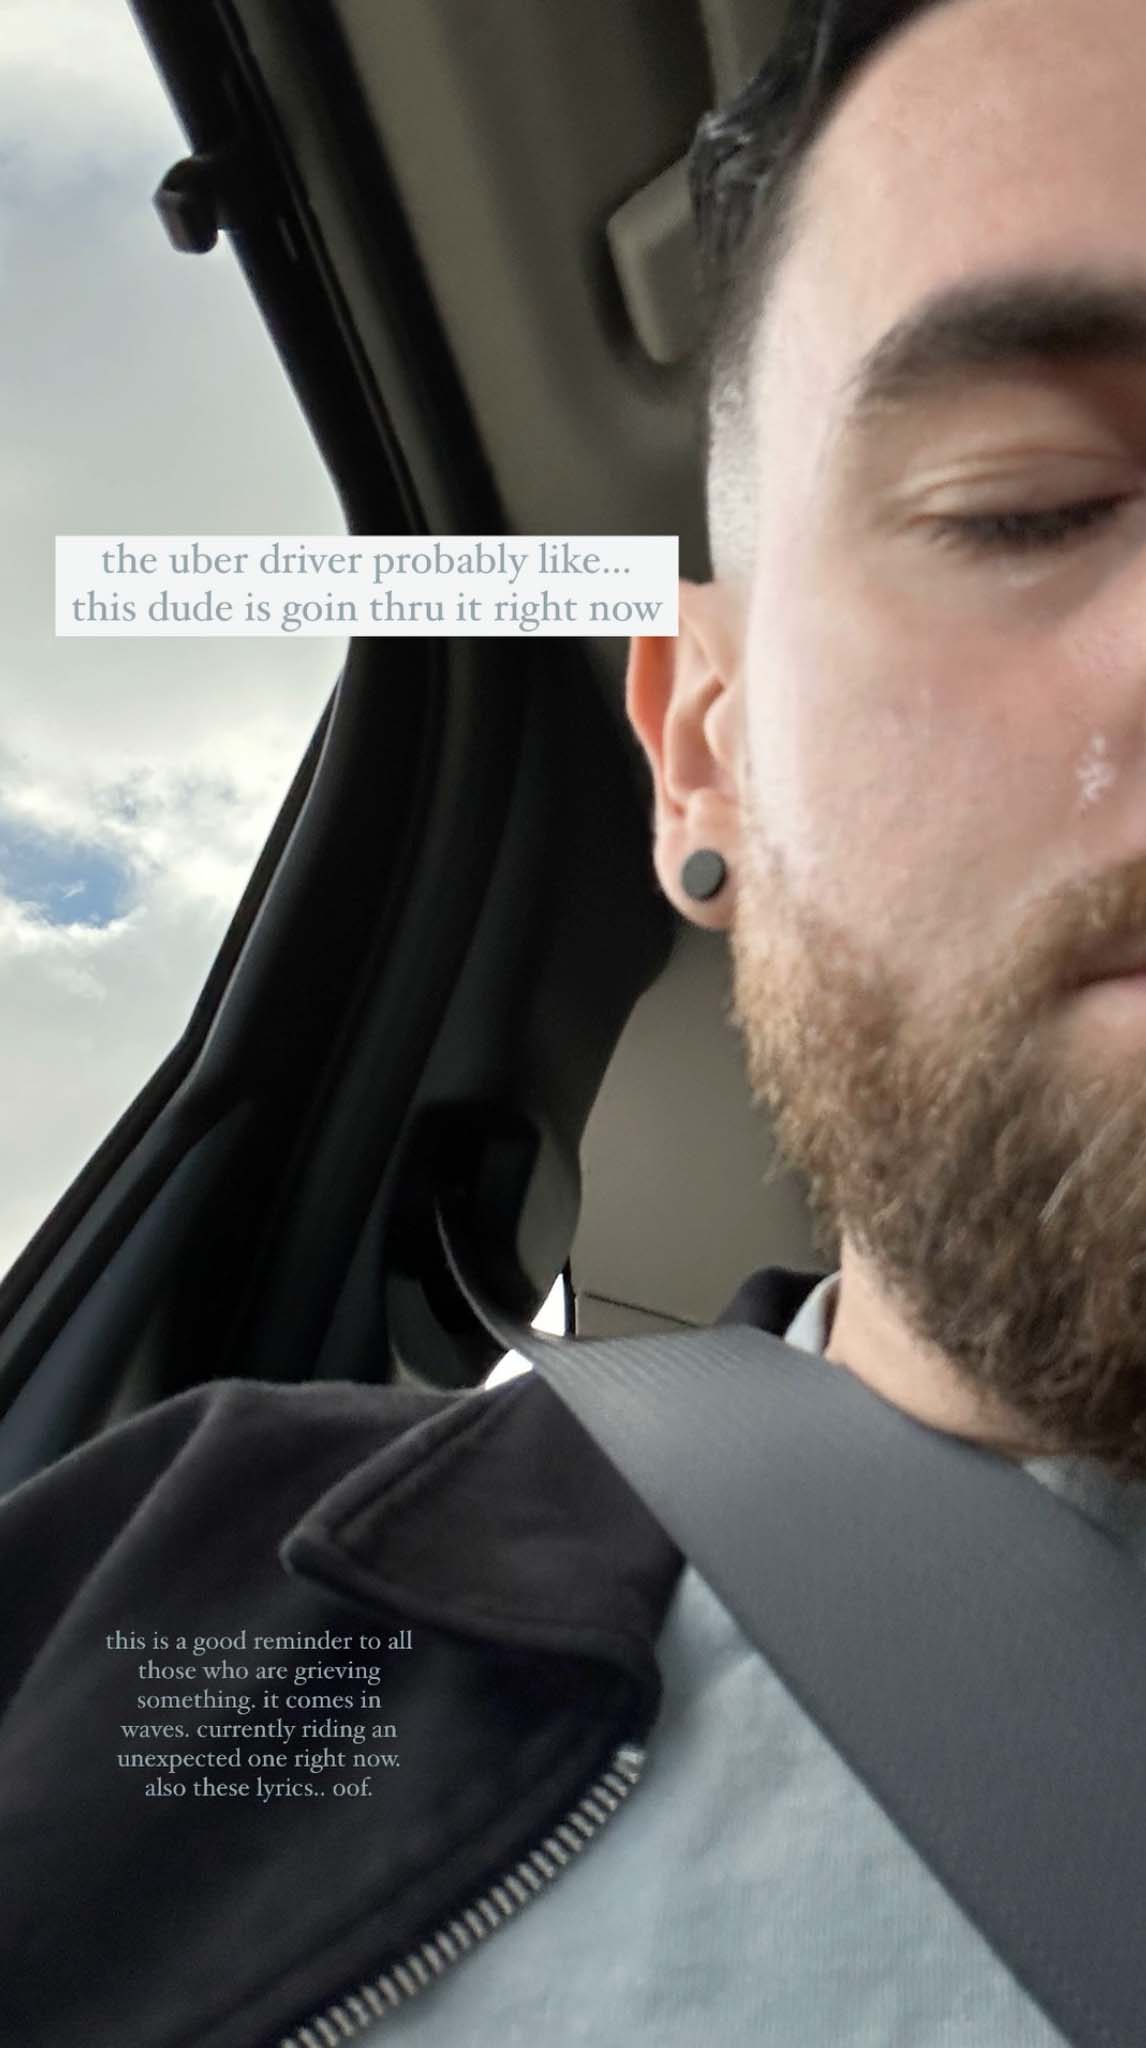 He also posted a picture of him crying while on his way home to see family